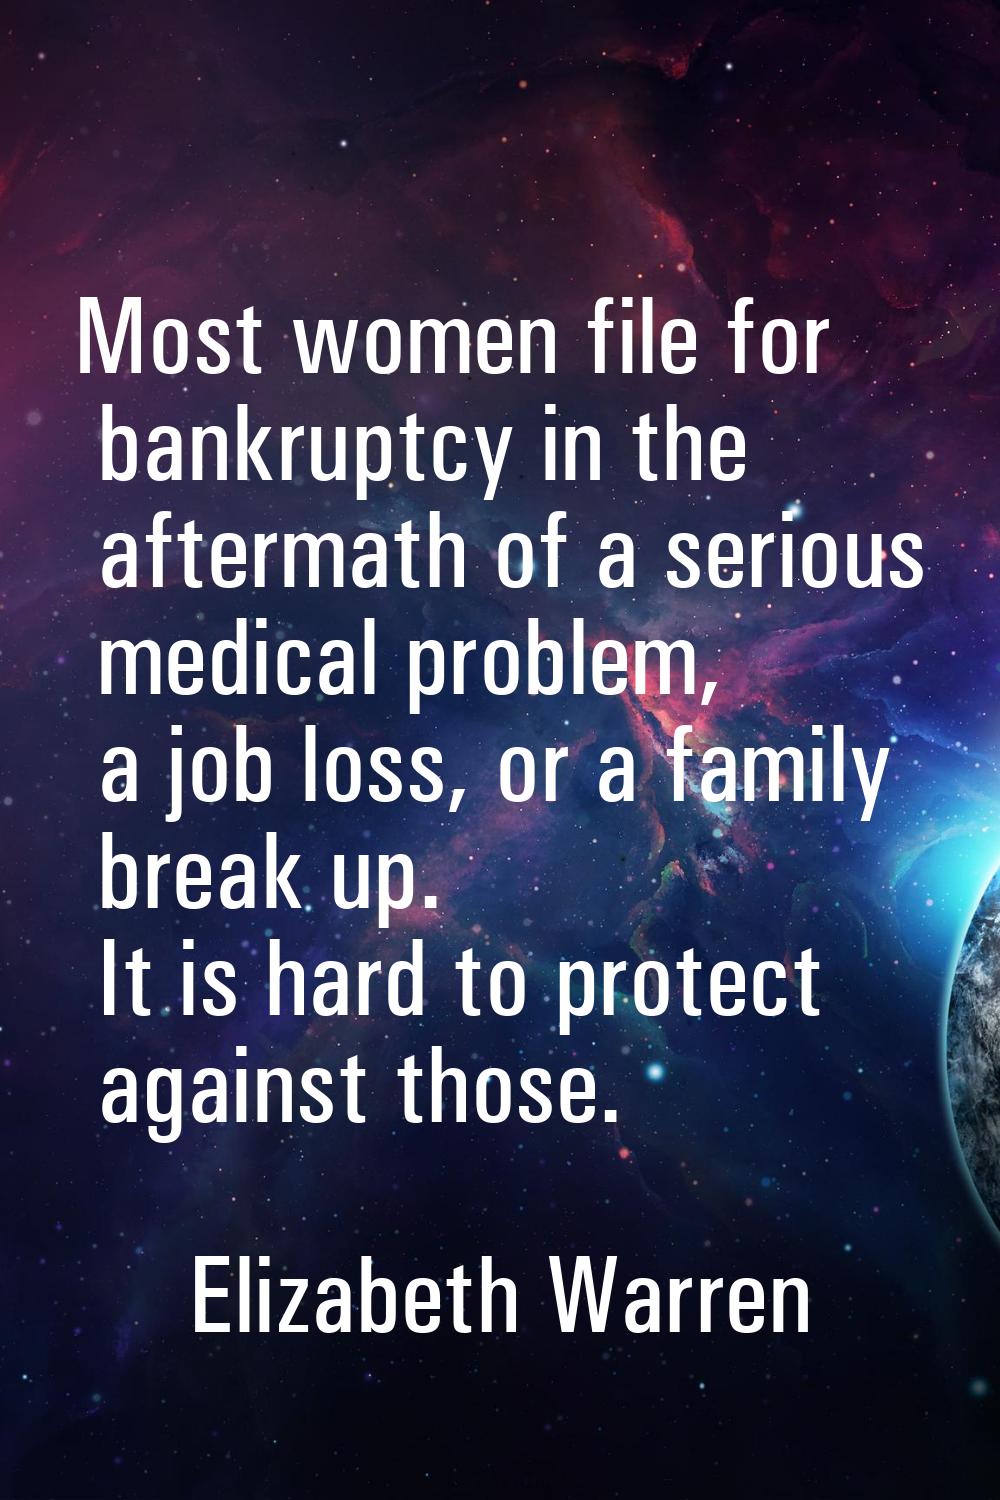 Most women file for bankruptcy in the aftermath of a serious medical problem, a job loss, or a fami